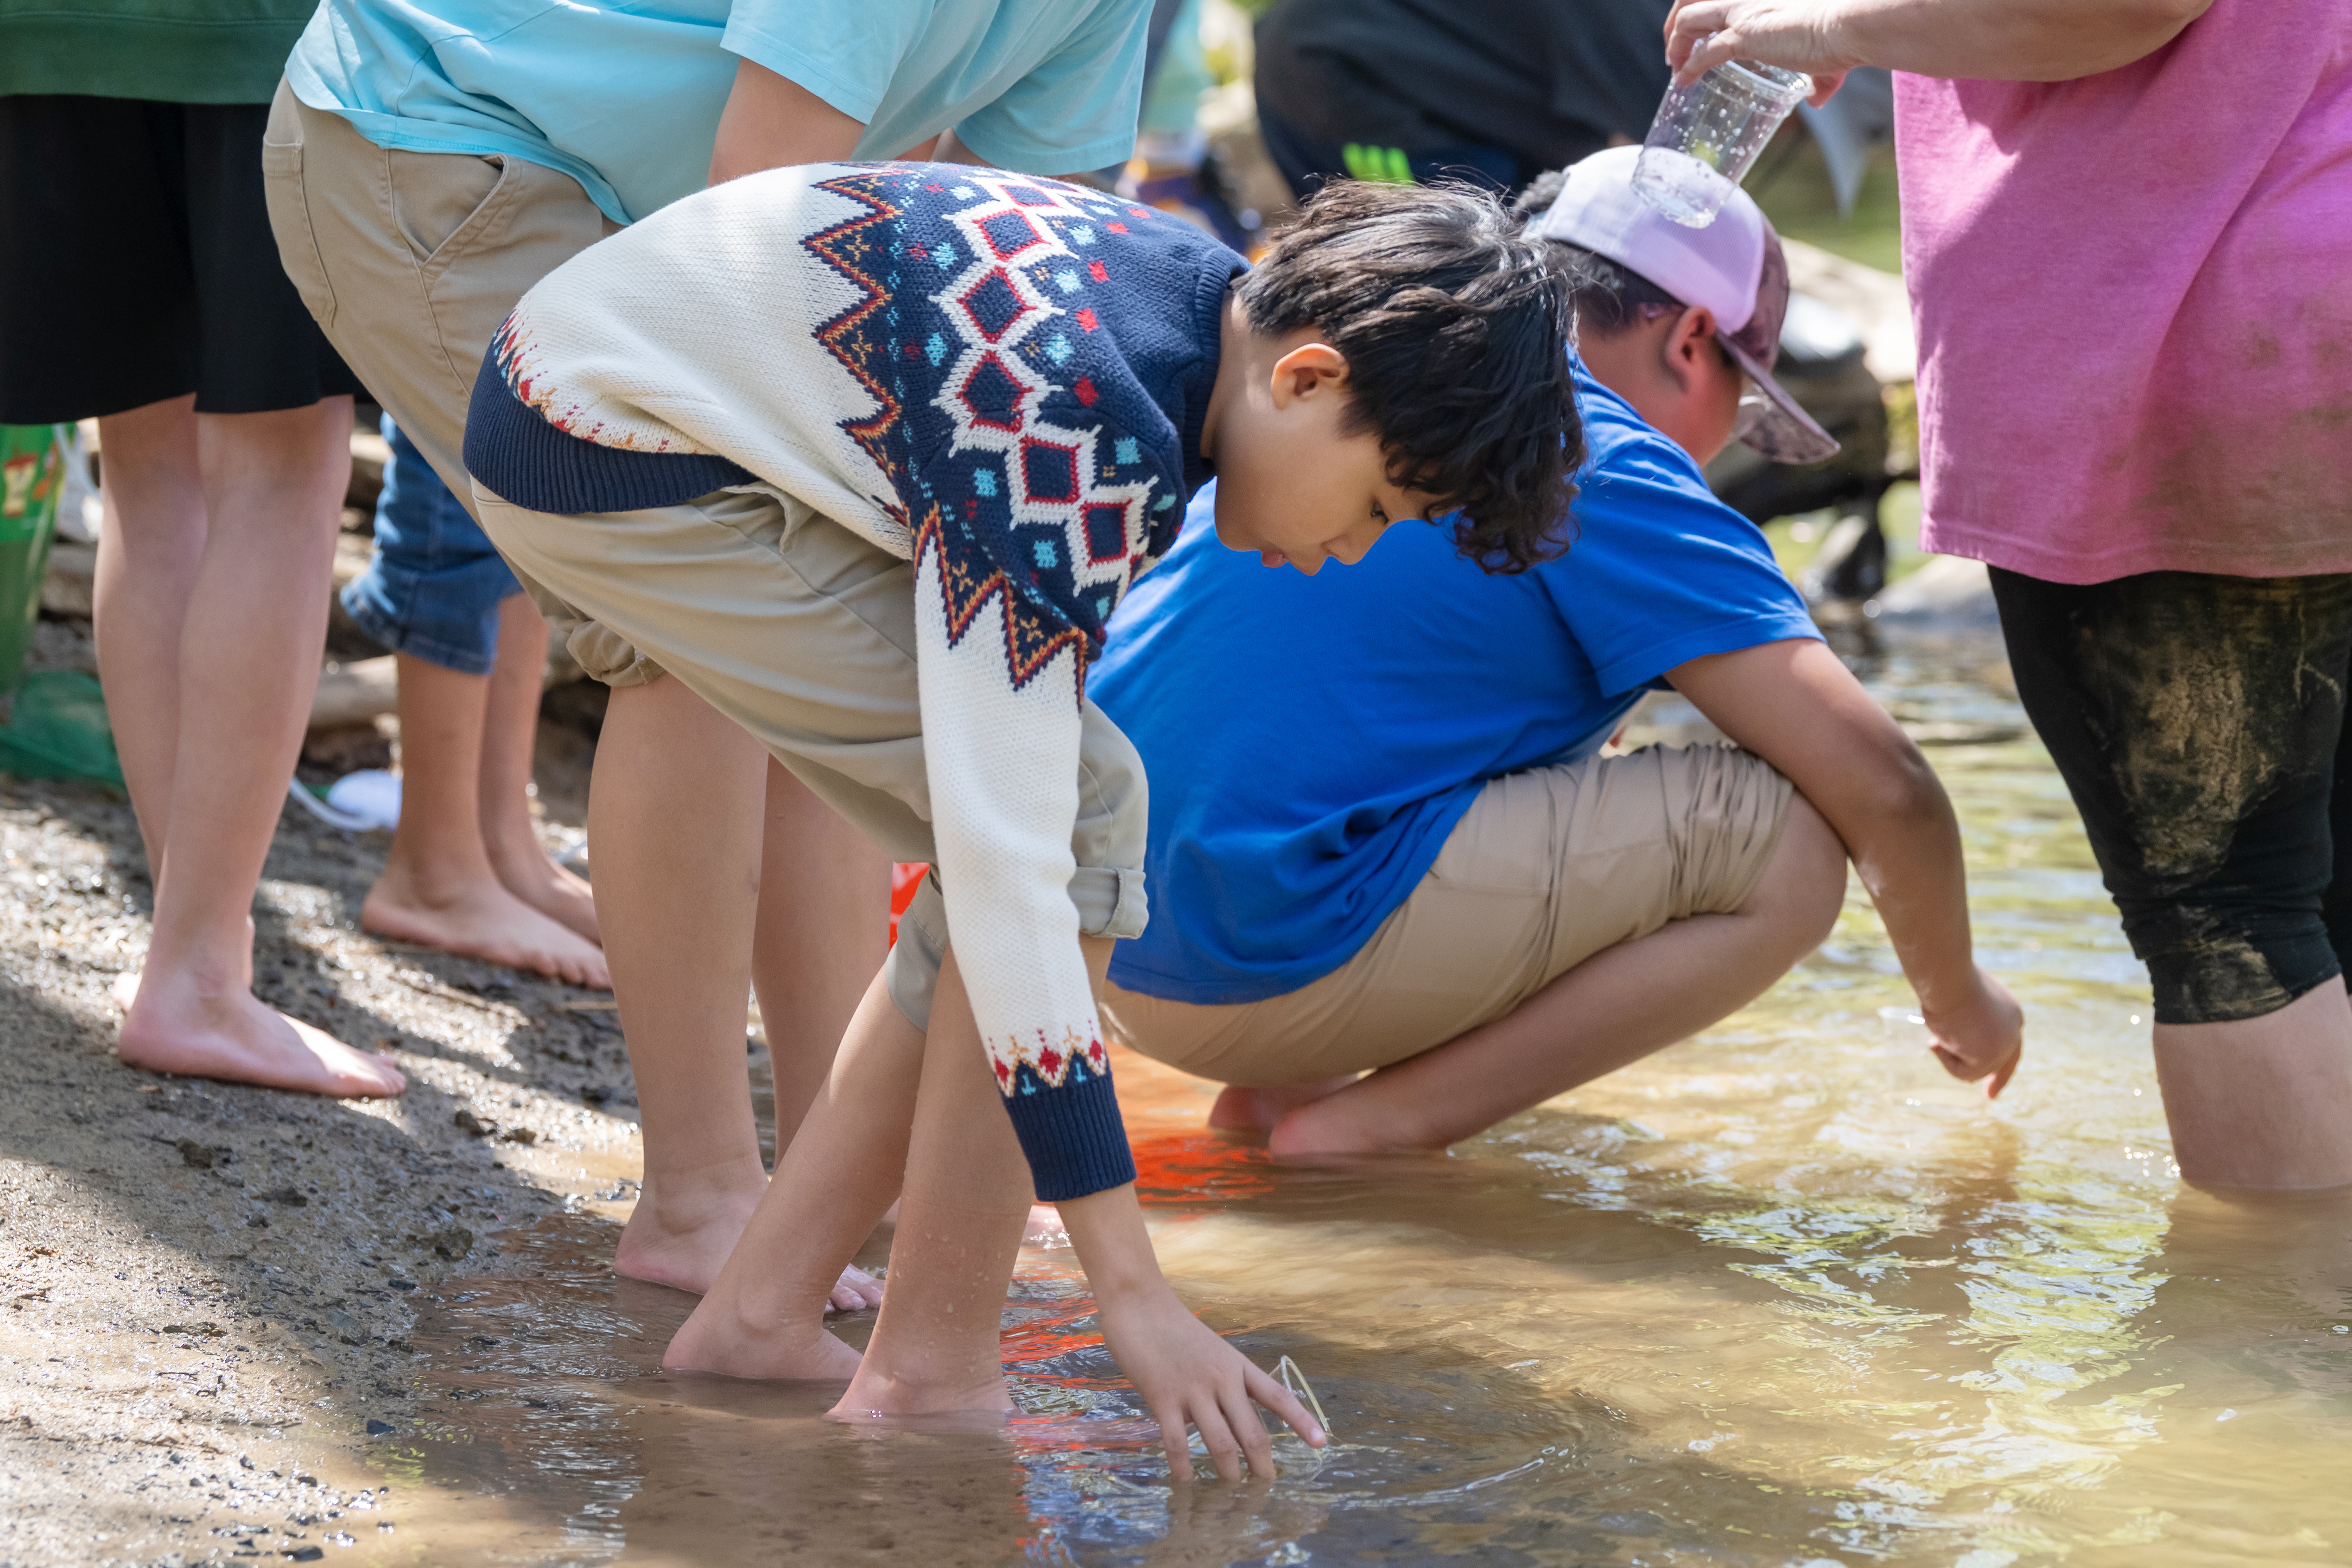 A Centreville Elementary School student bends over as he gently tilts his cup into the water, releasing a young trout to swim freely in the stream.